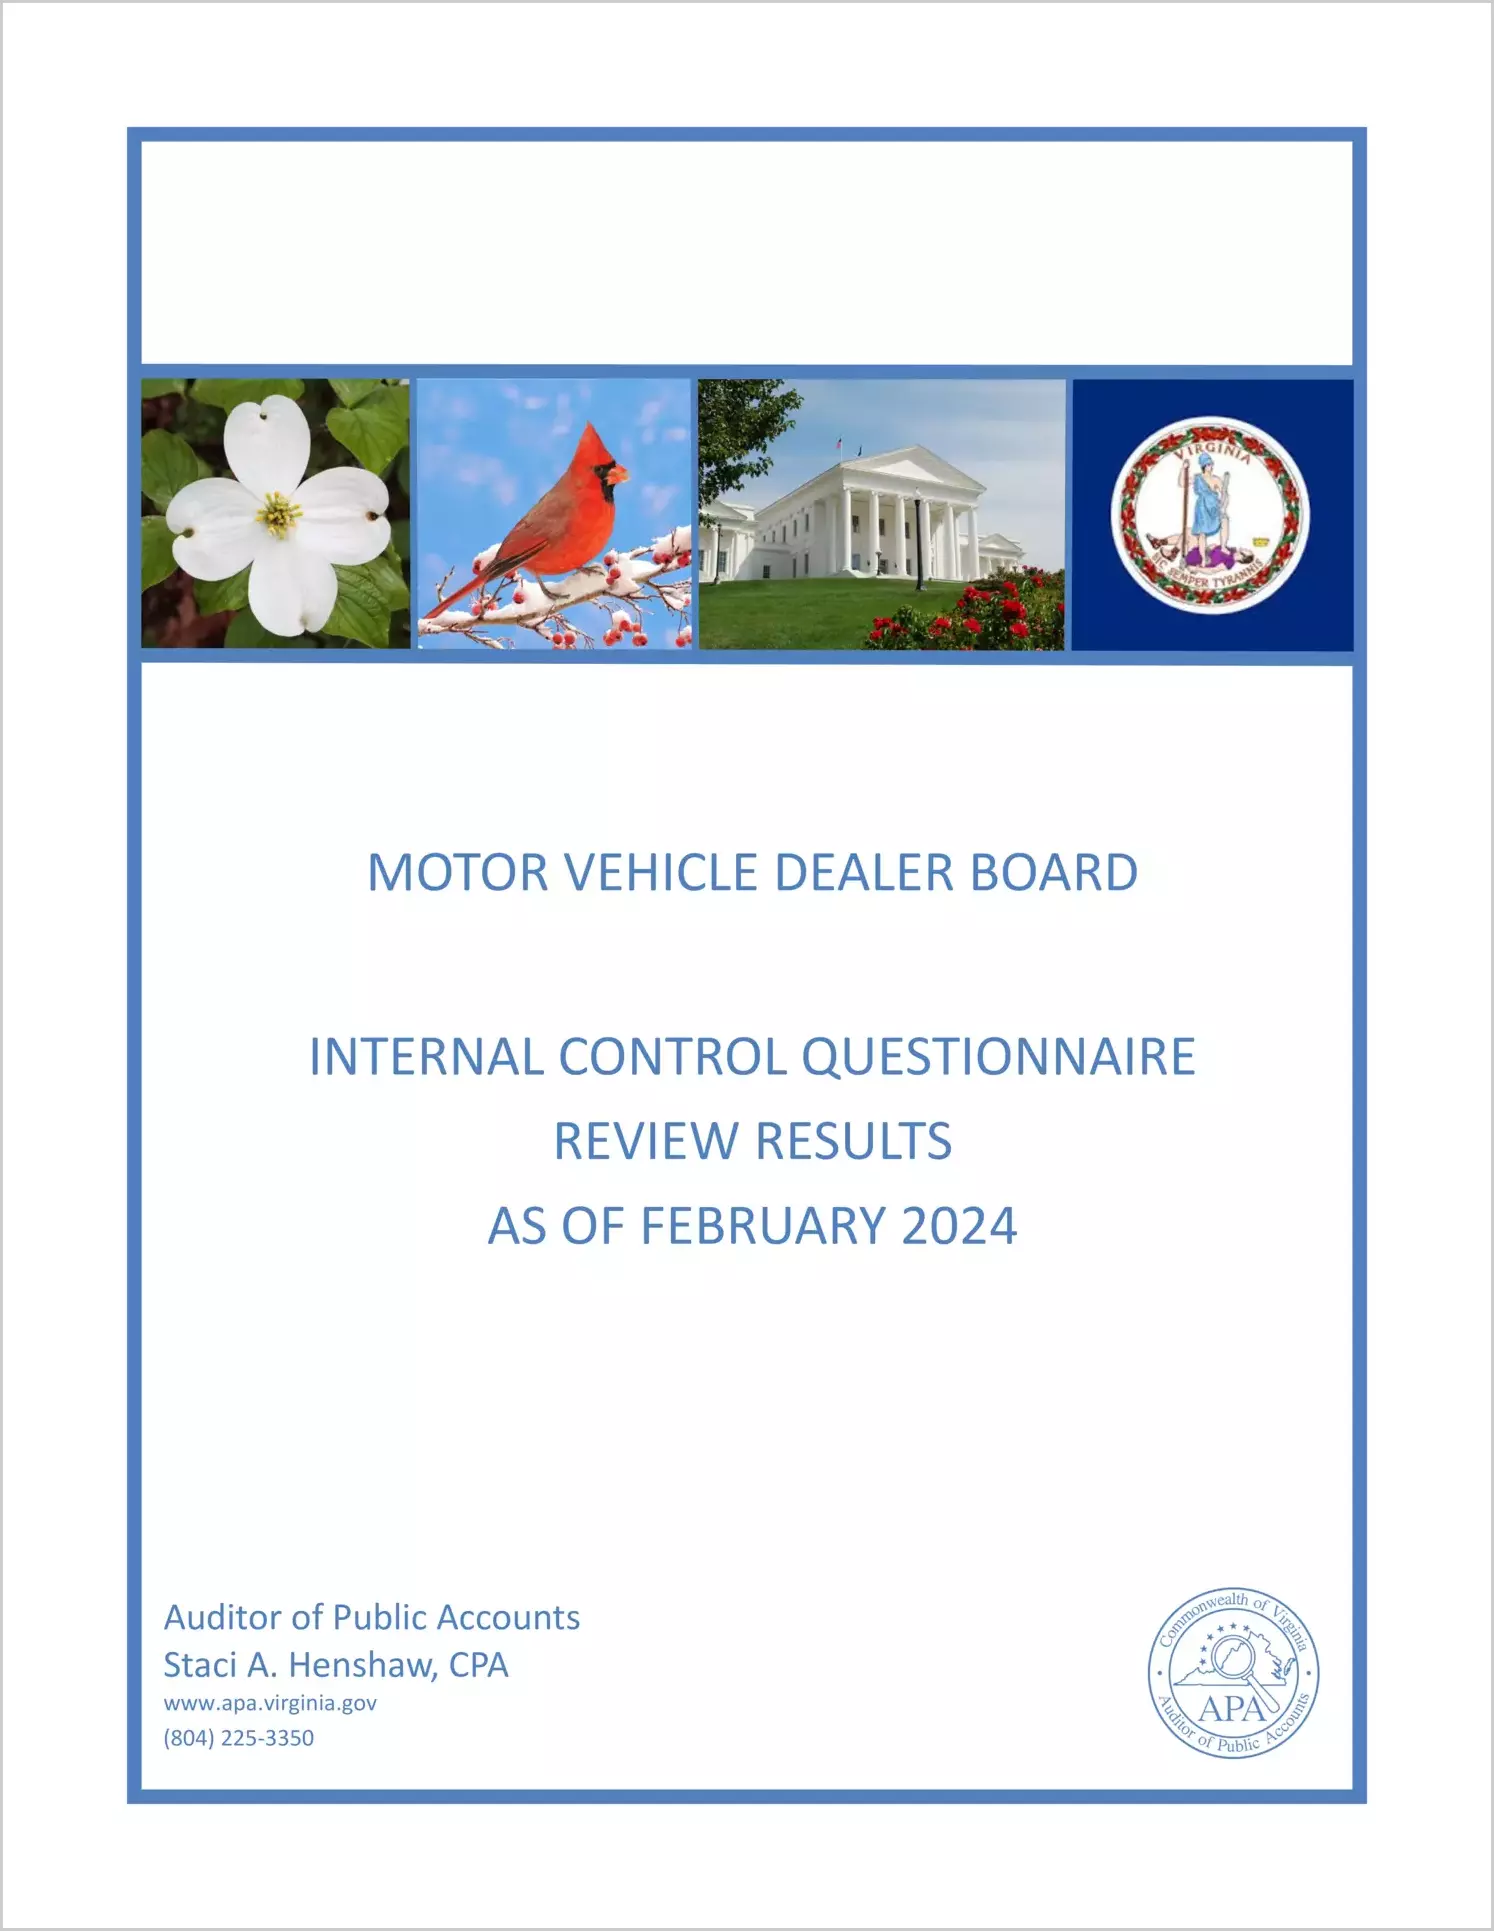 Motor Vehicle Dealer Board Internal Control Questionnaire Review Results as of February 2024